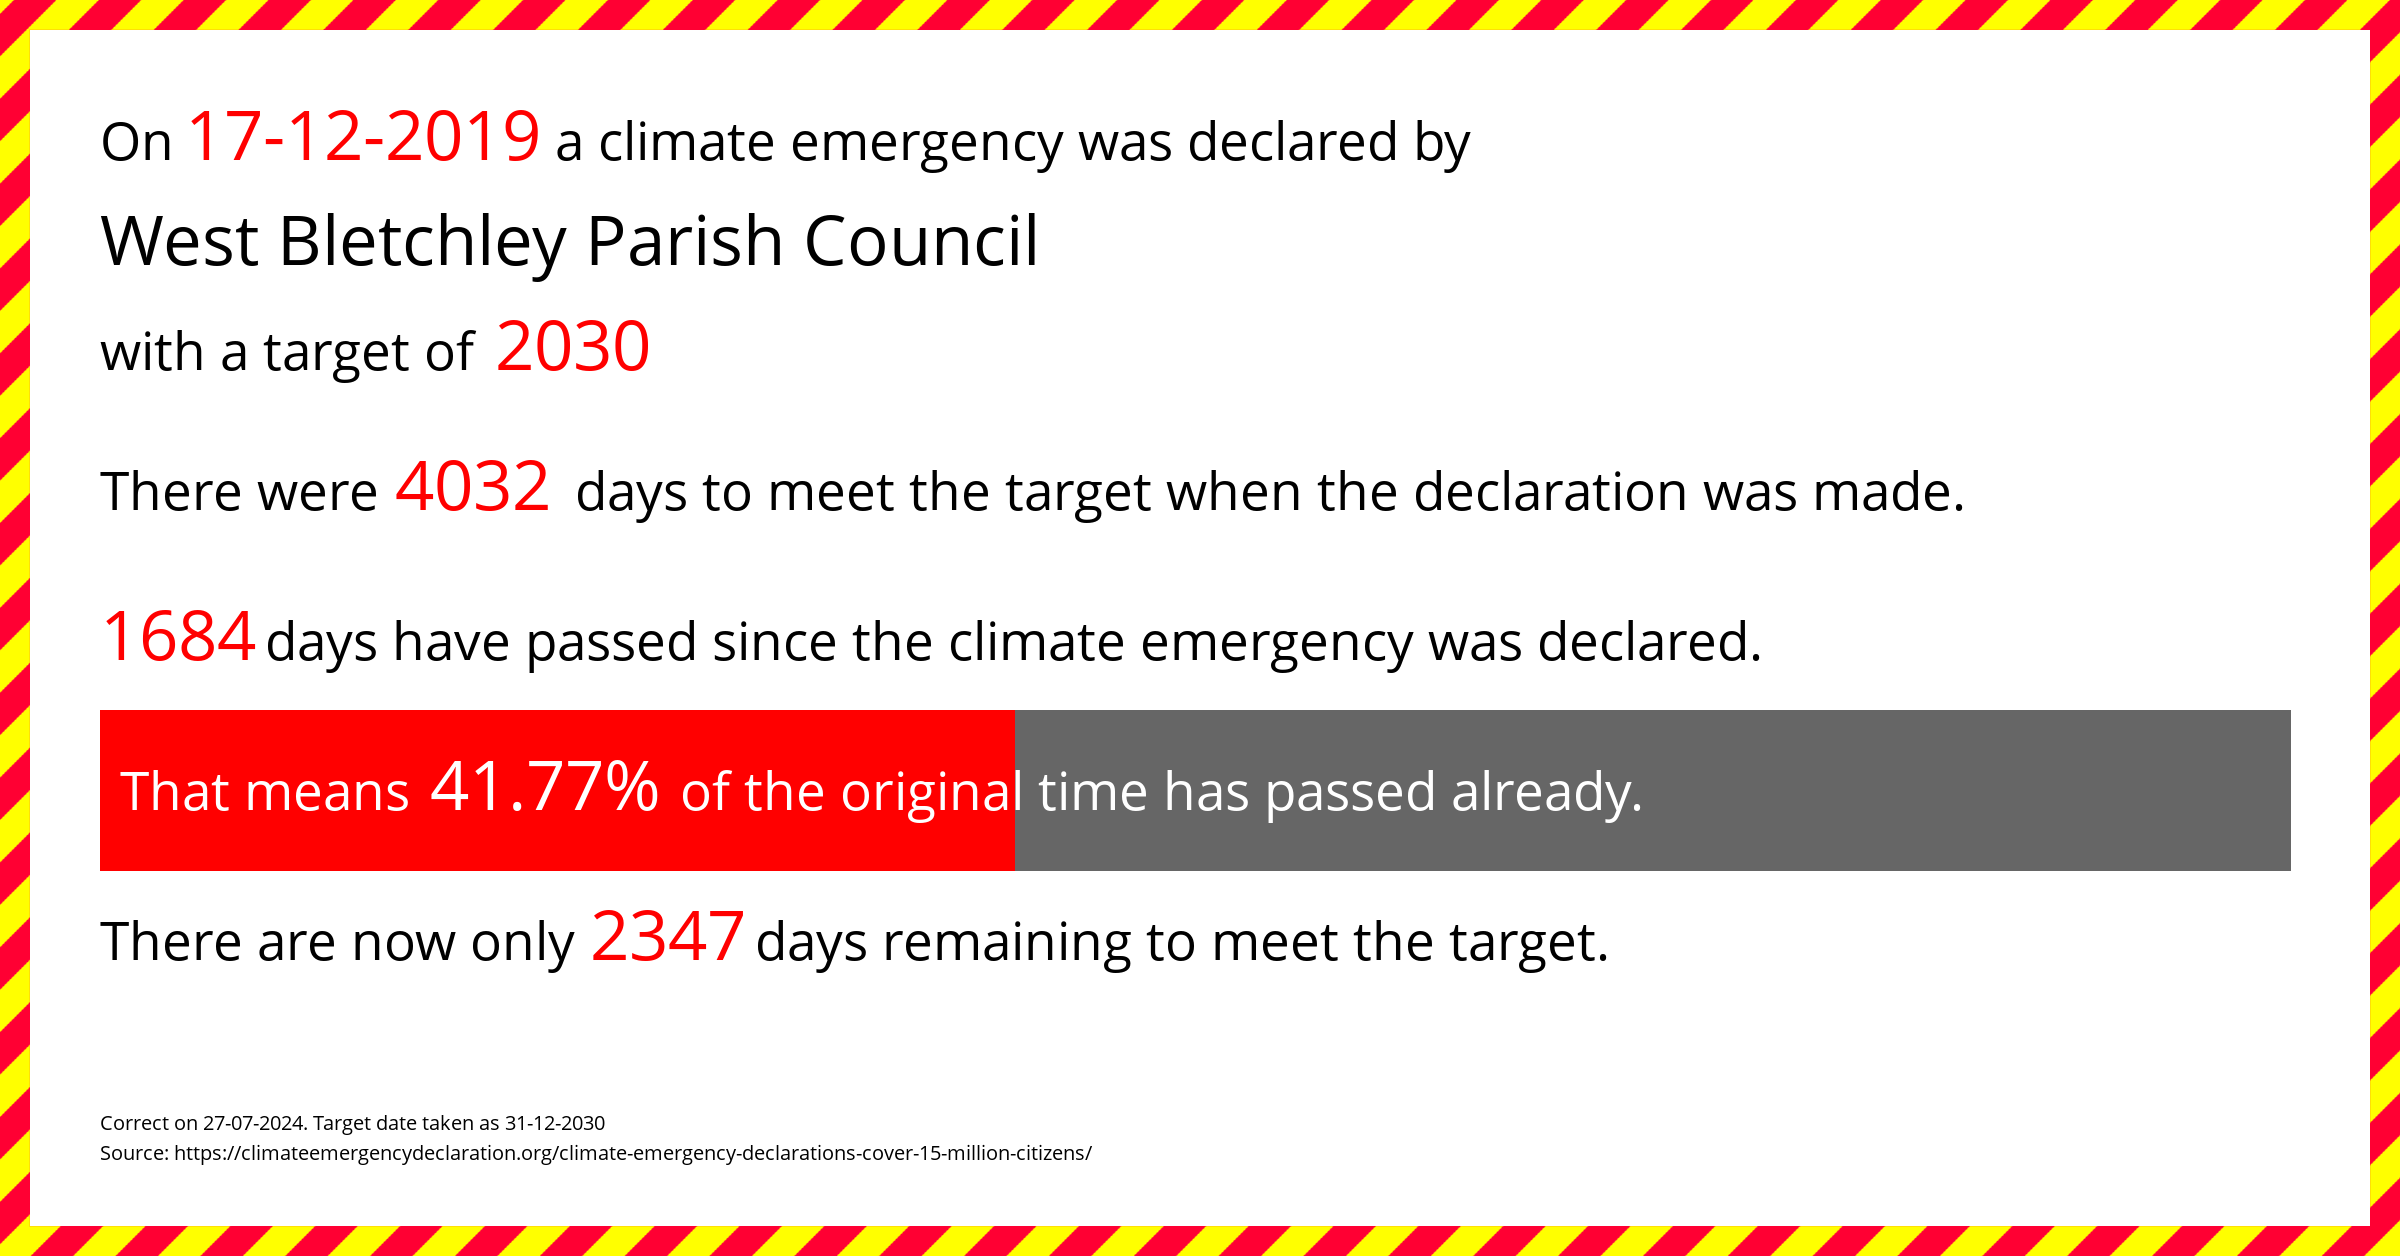 West Bletchley Parish Council  declared a Climate emergency on Tuesday 17th December 2019, with a target of 2030.